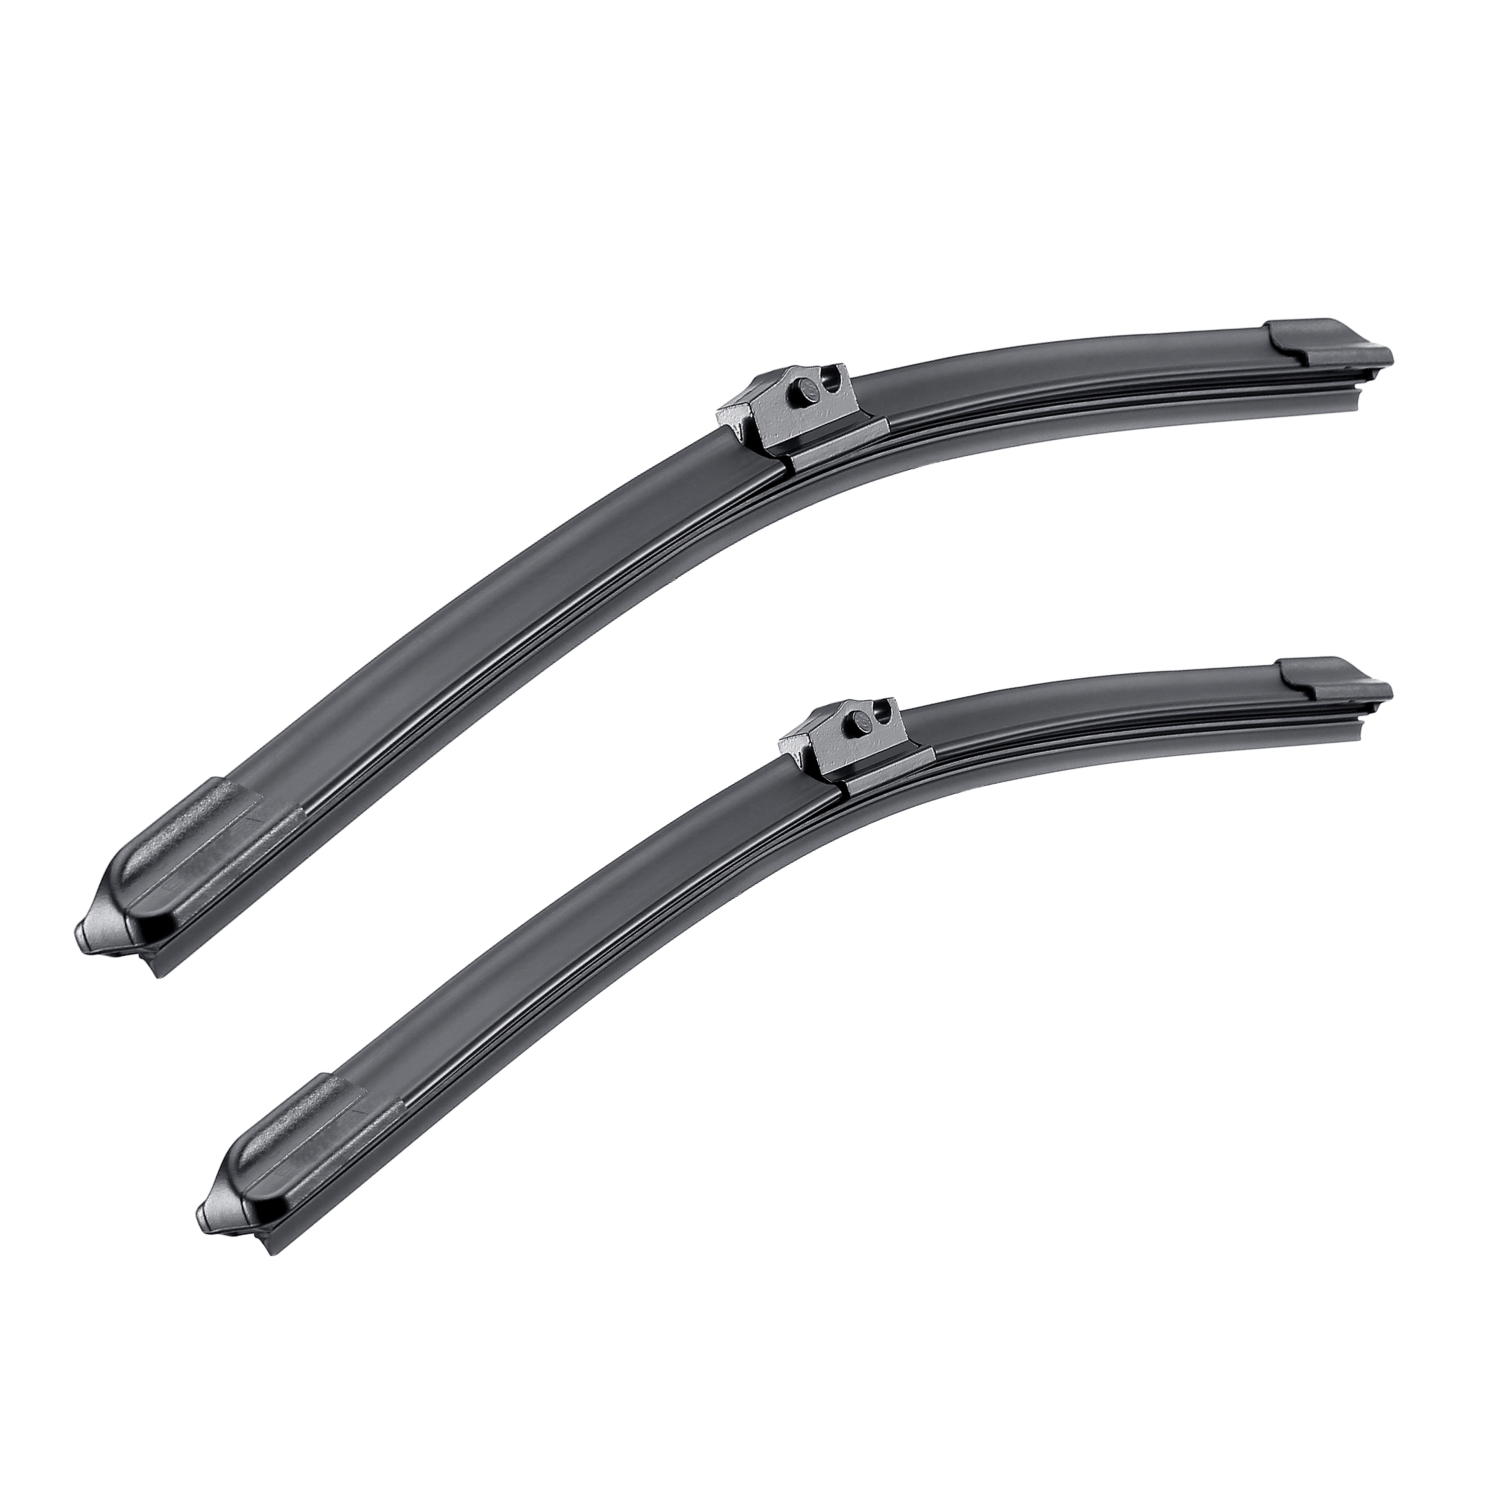 Wiper Blades for Subaru Forester 2012 2013 2014 2015 2016 - 2018 Front 26" + 17" | eBay What Size Wiper Blades For 2014 Subaru Forester